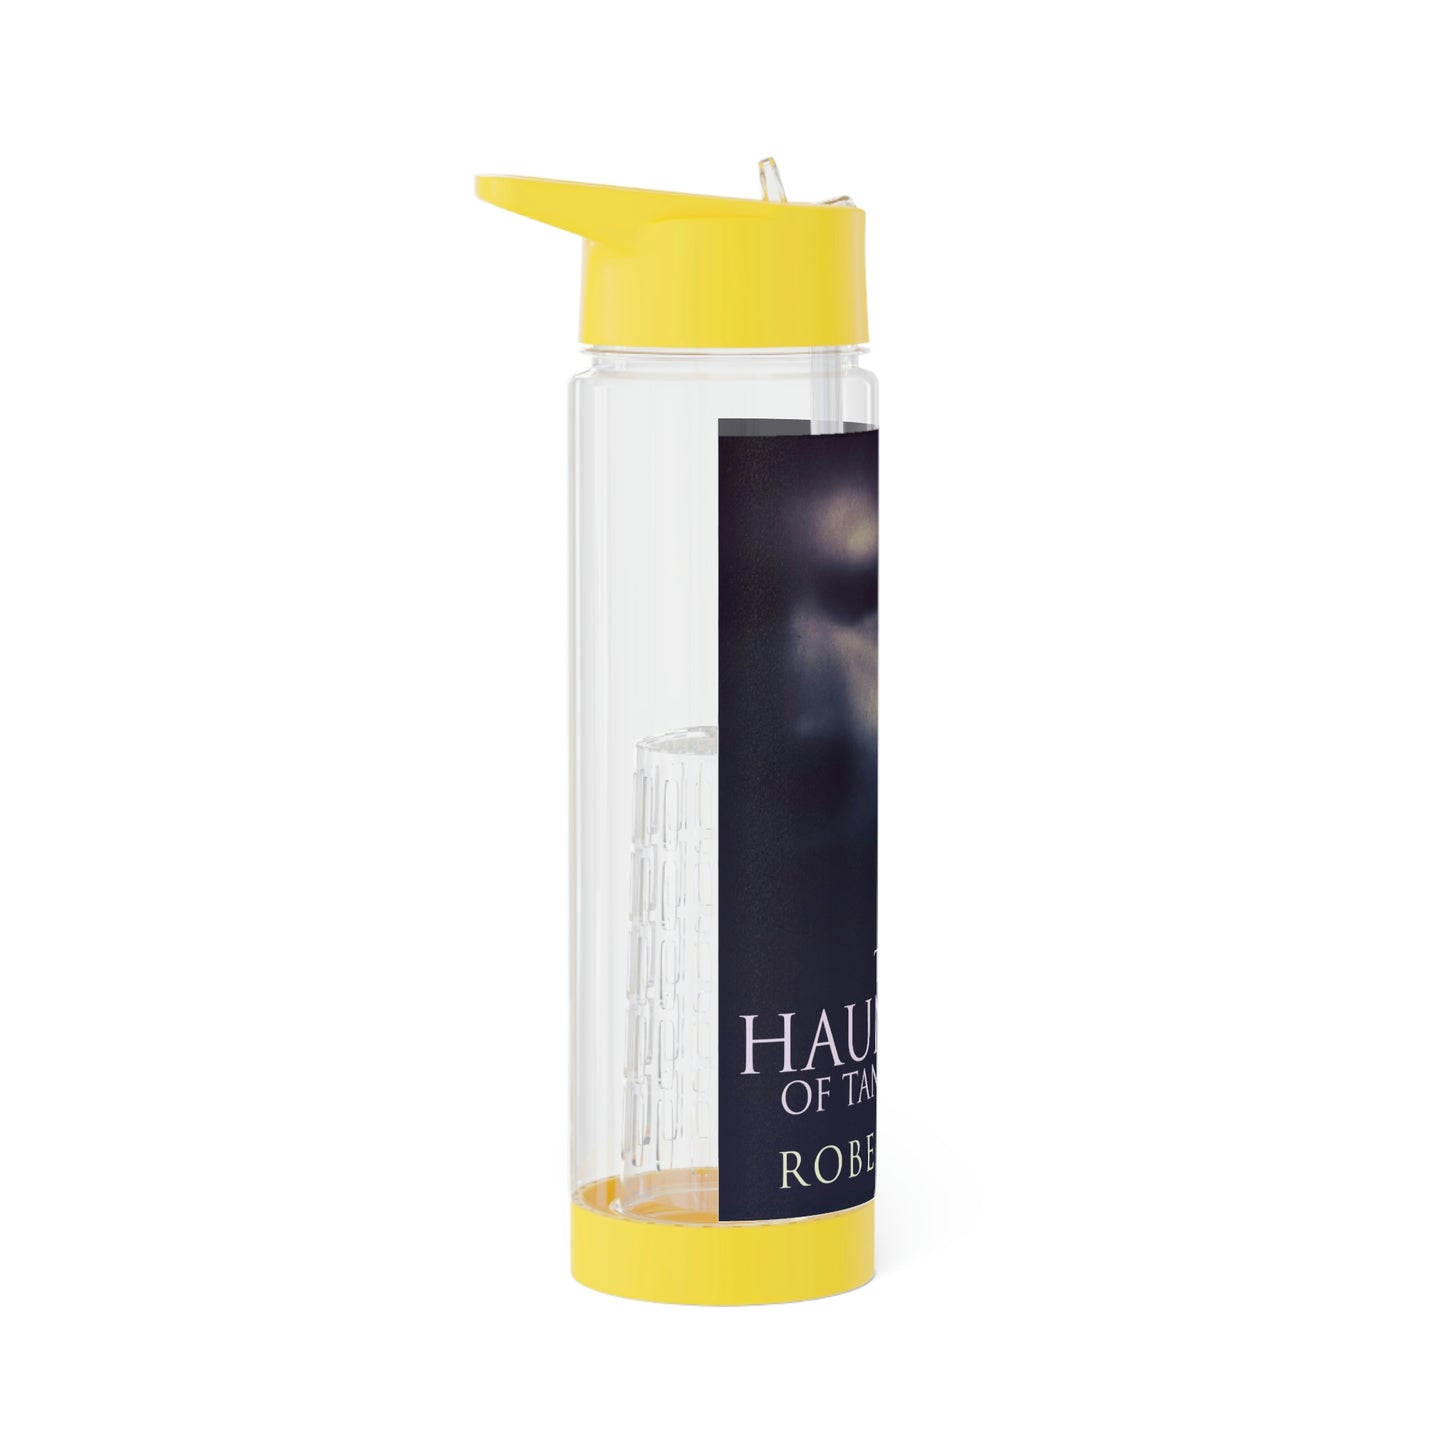 The Haunting Of Tana Grant - Infuser Water Bottle